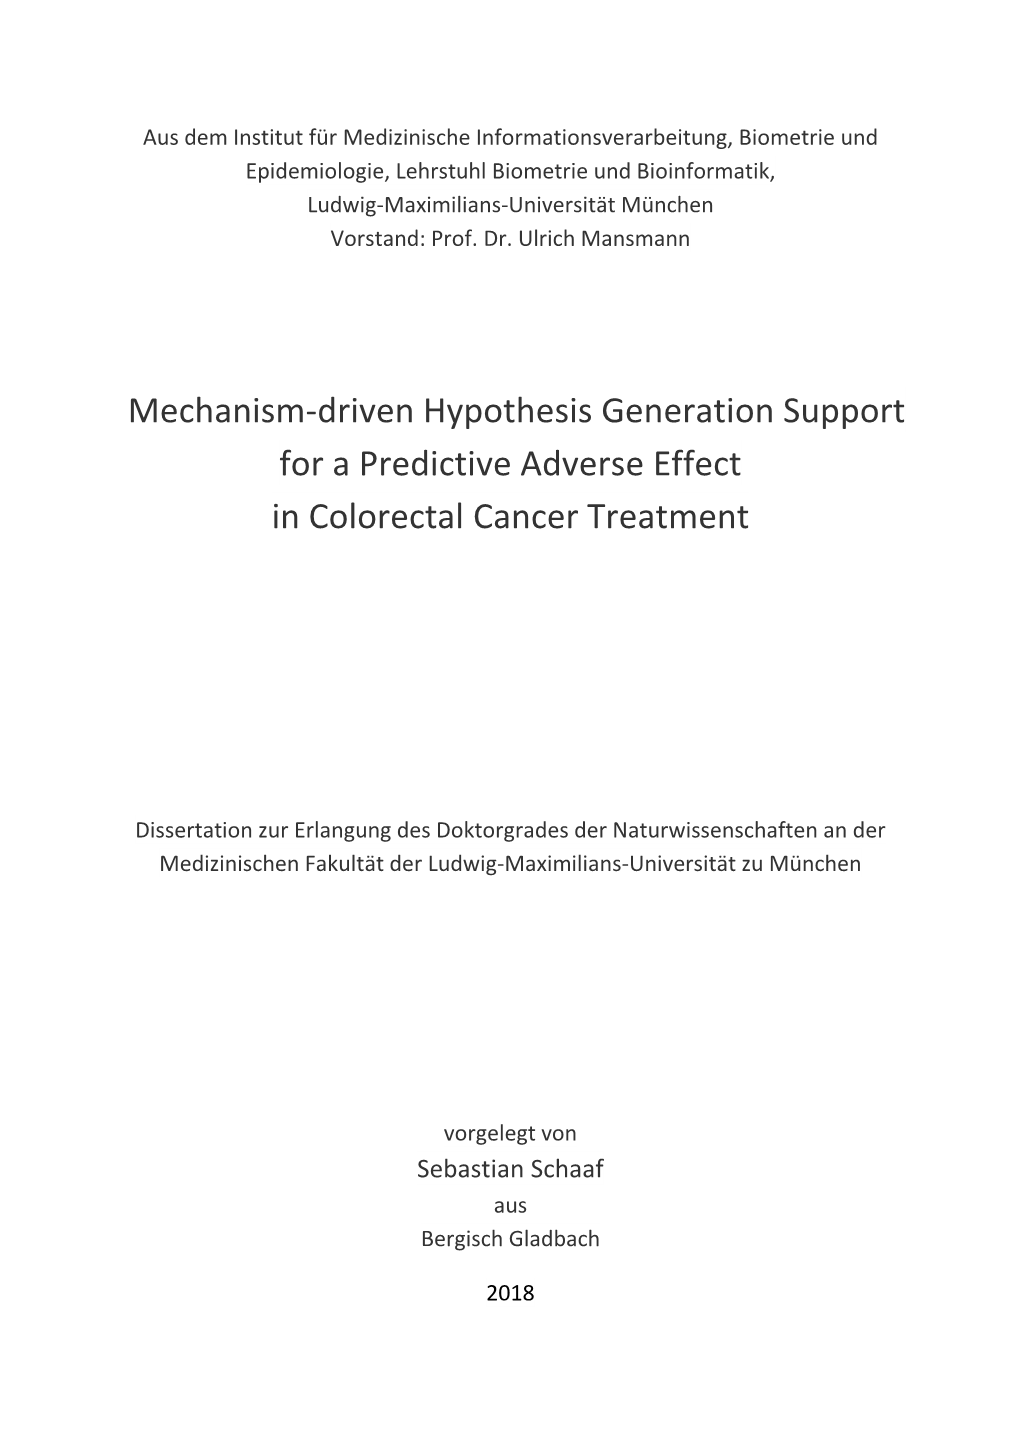 Mechanism-Driven Hypothesis Generation Support for a Predictive Adverse Effect in Colorectal Cancer Treatment